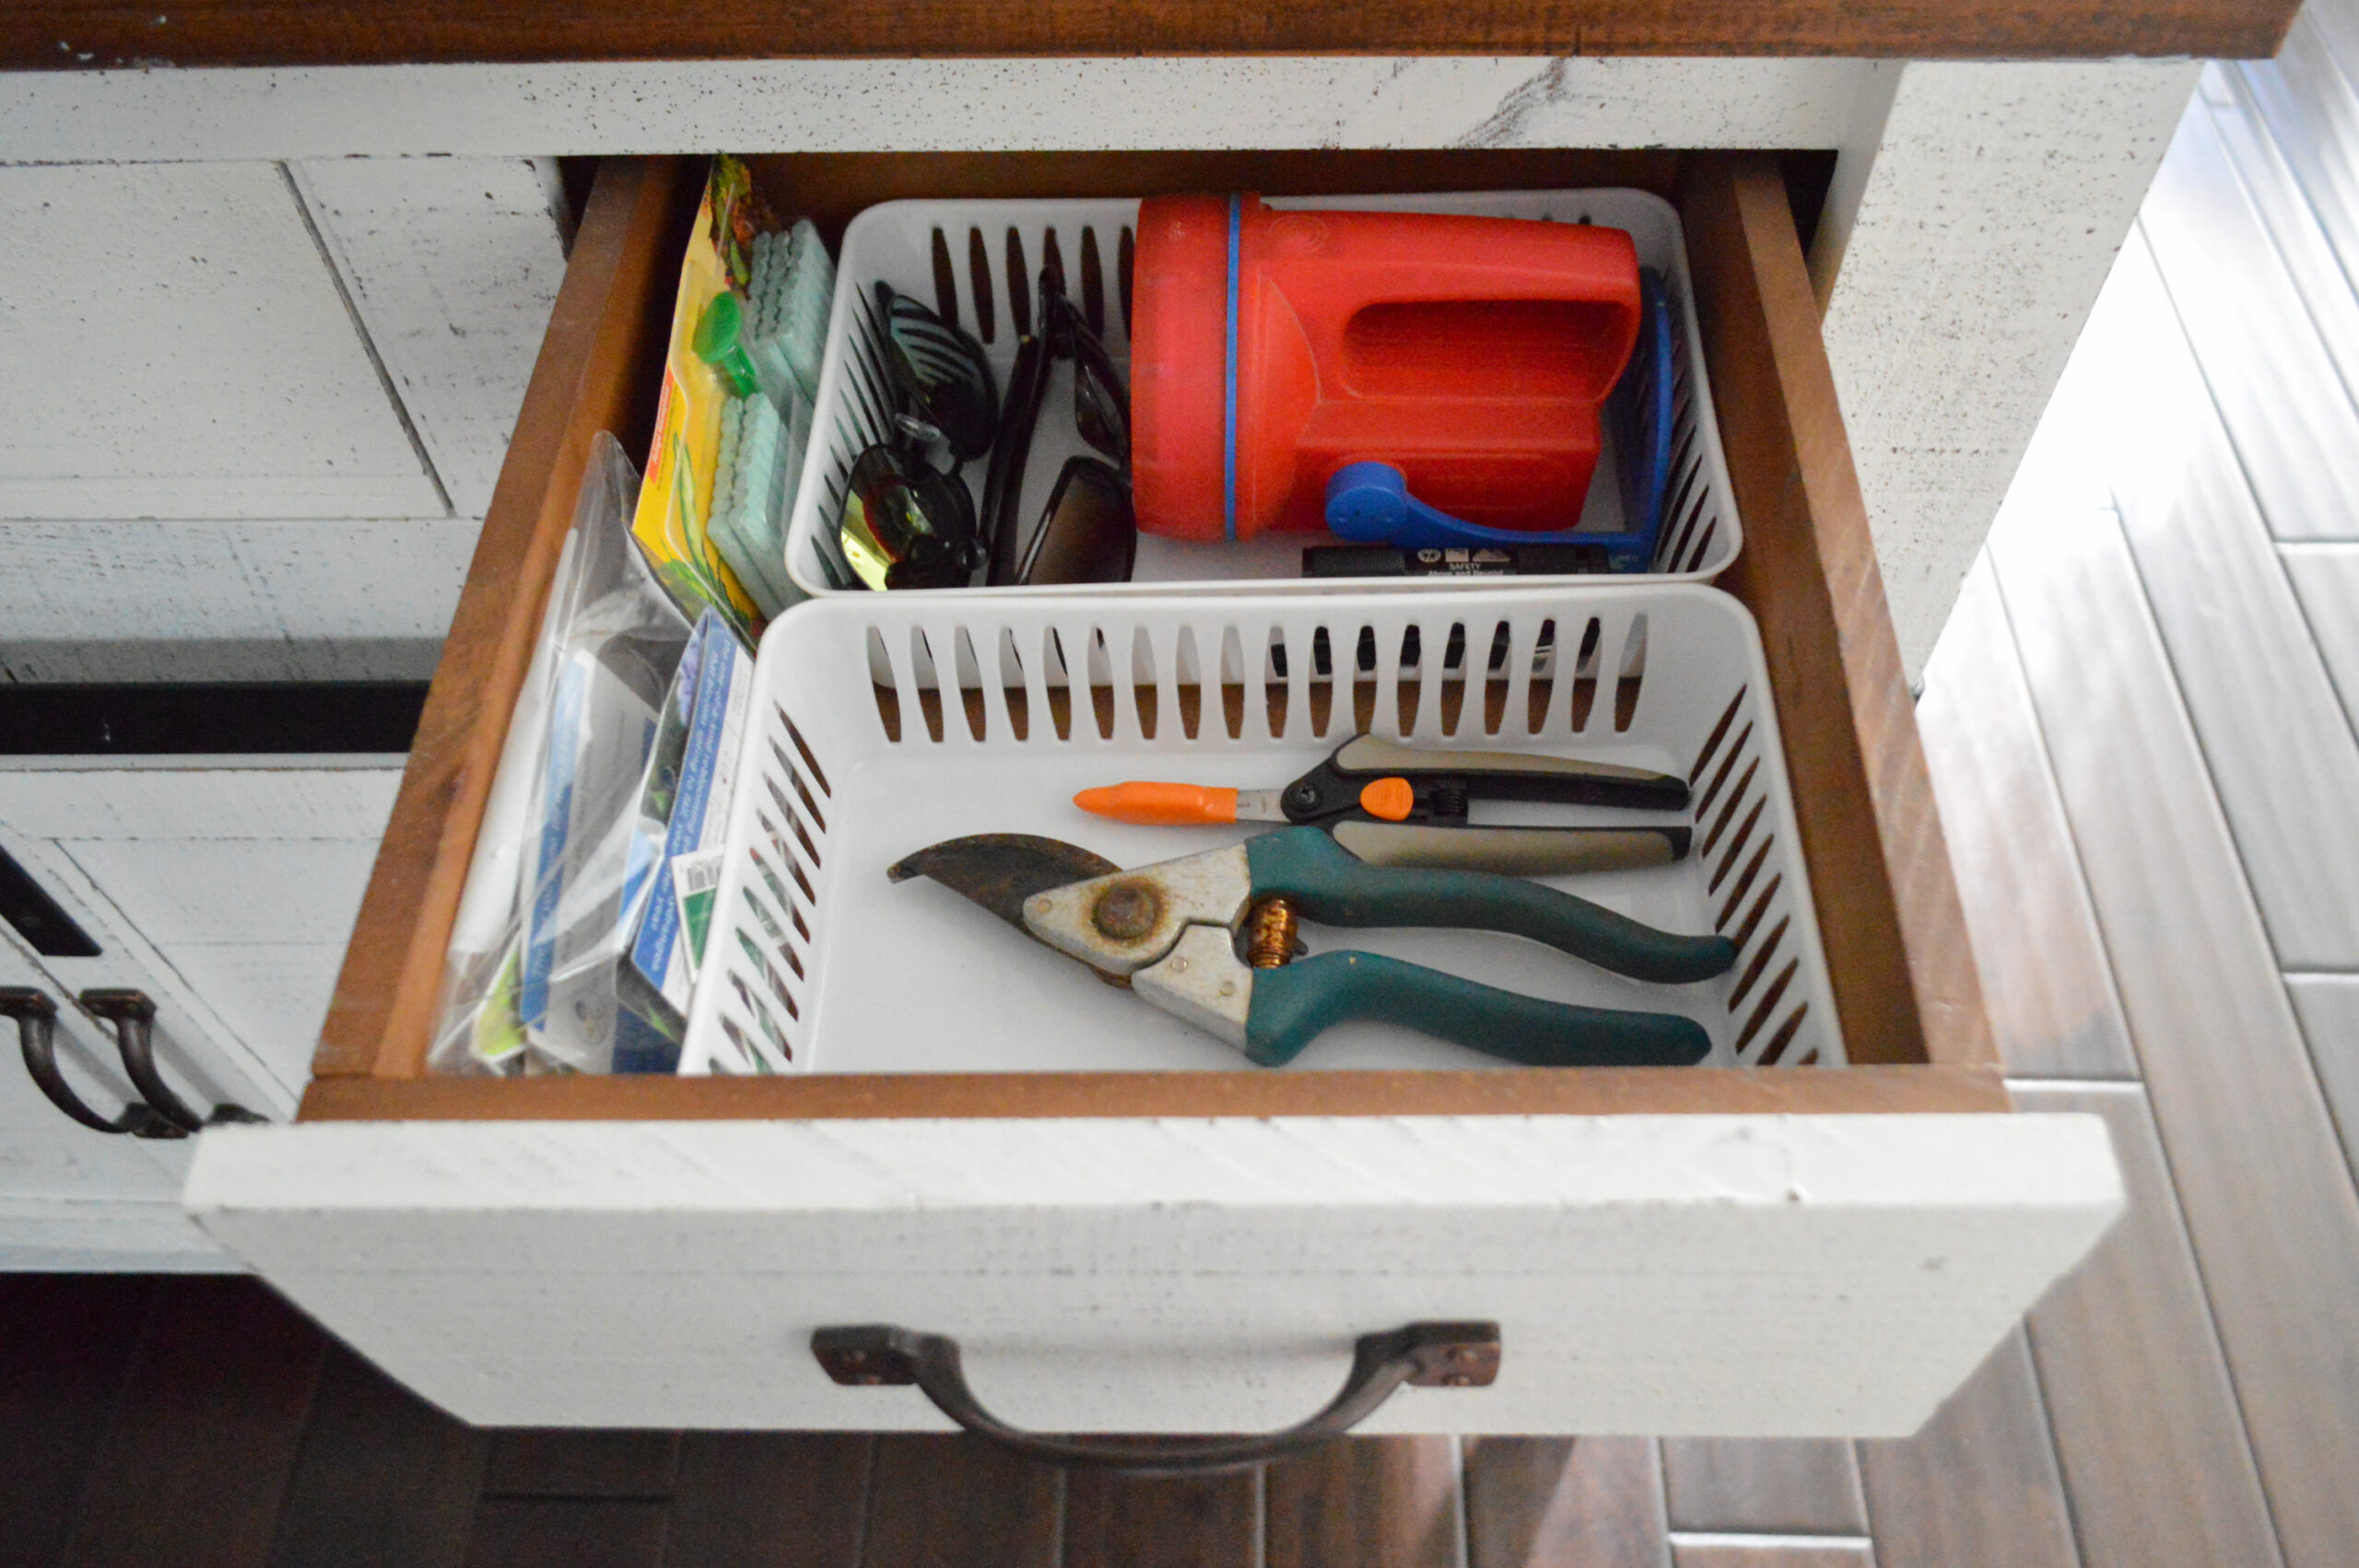 https://foxhollowcottage.com/wp-content/uploads/2021/01/How-to-organize-your-kitchen-junk-miscellaneous-items-drawer-Simple-tips-ideas-month-long-weekly-Cleaning-Organizing-event-with-Free-Printable-checklist-www.foxhollowcottage.com_-14-scaled.jpg